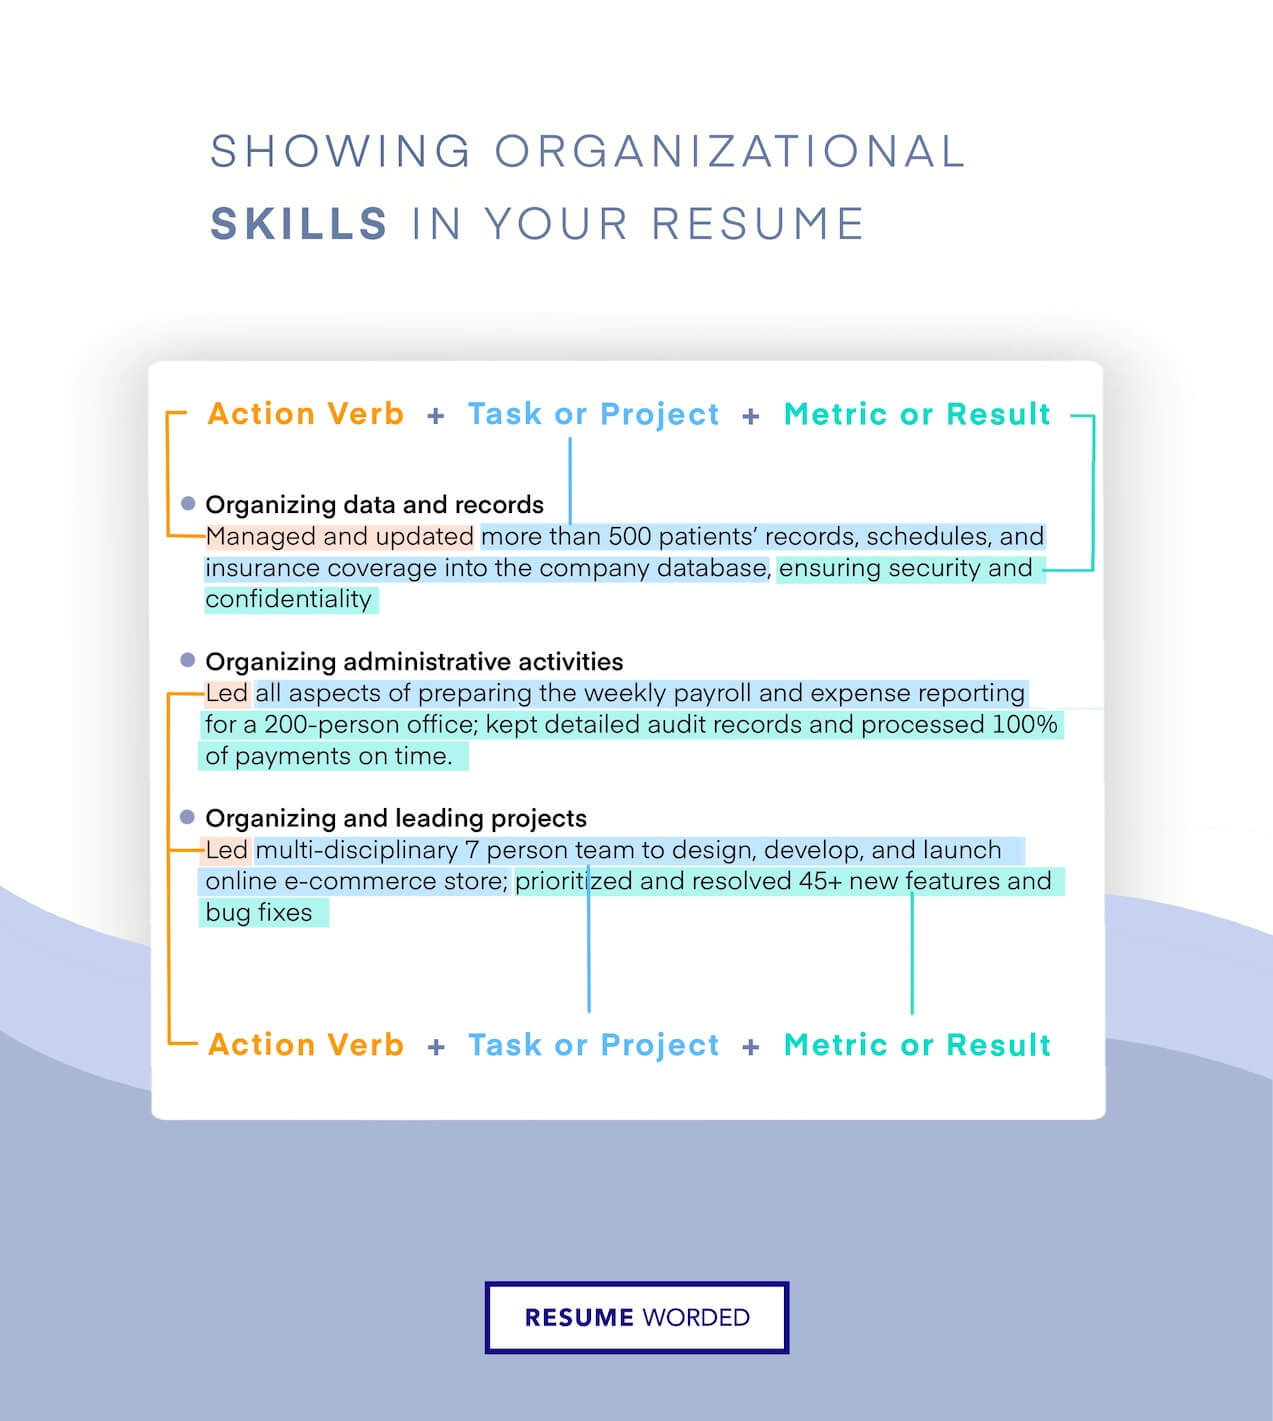 Demonstrate your organizational skills. - Chief Administrative Officer Resume